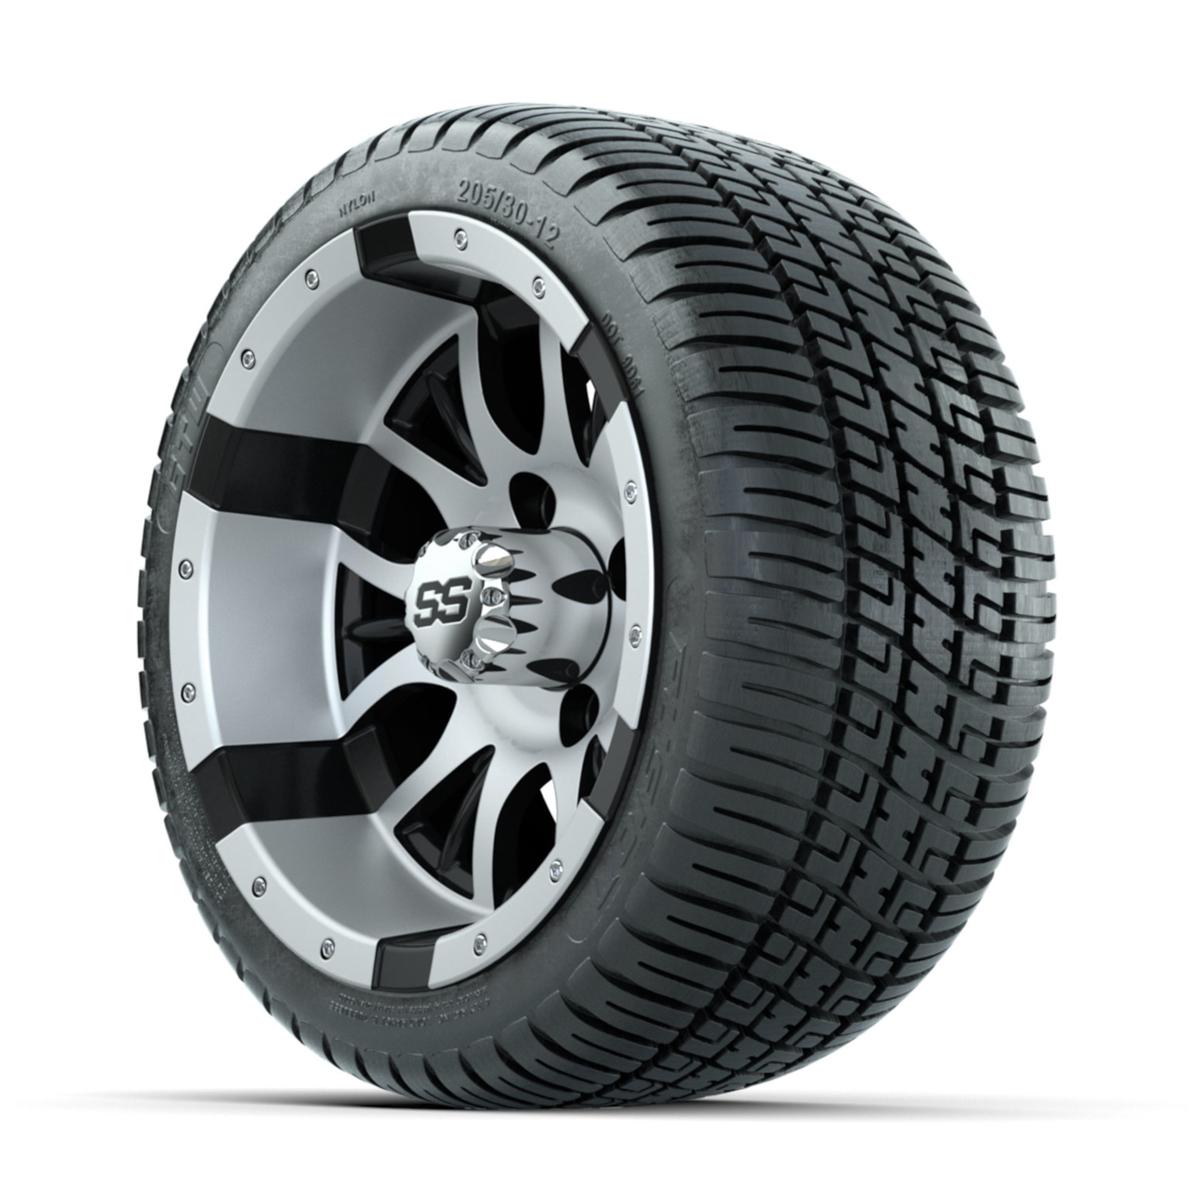 GTW Diesel Machined/Black 12 in Wheels with 205/30-12 Fusion Street Tires – Full Set